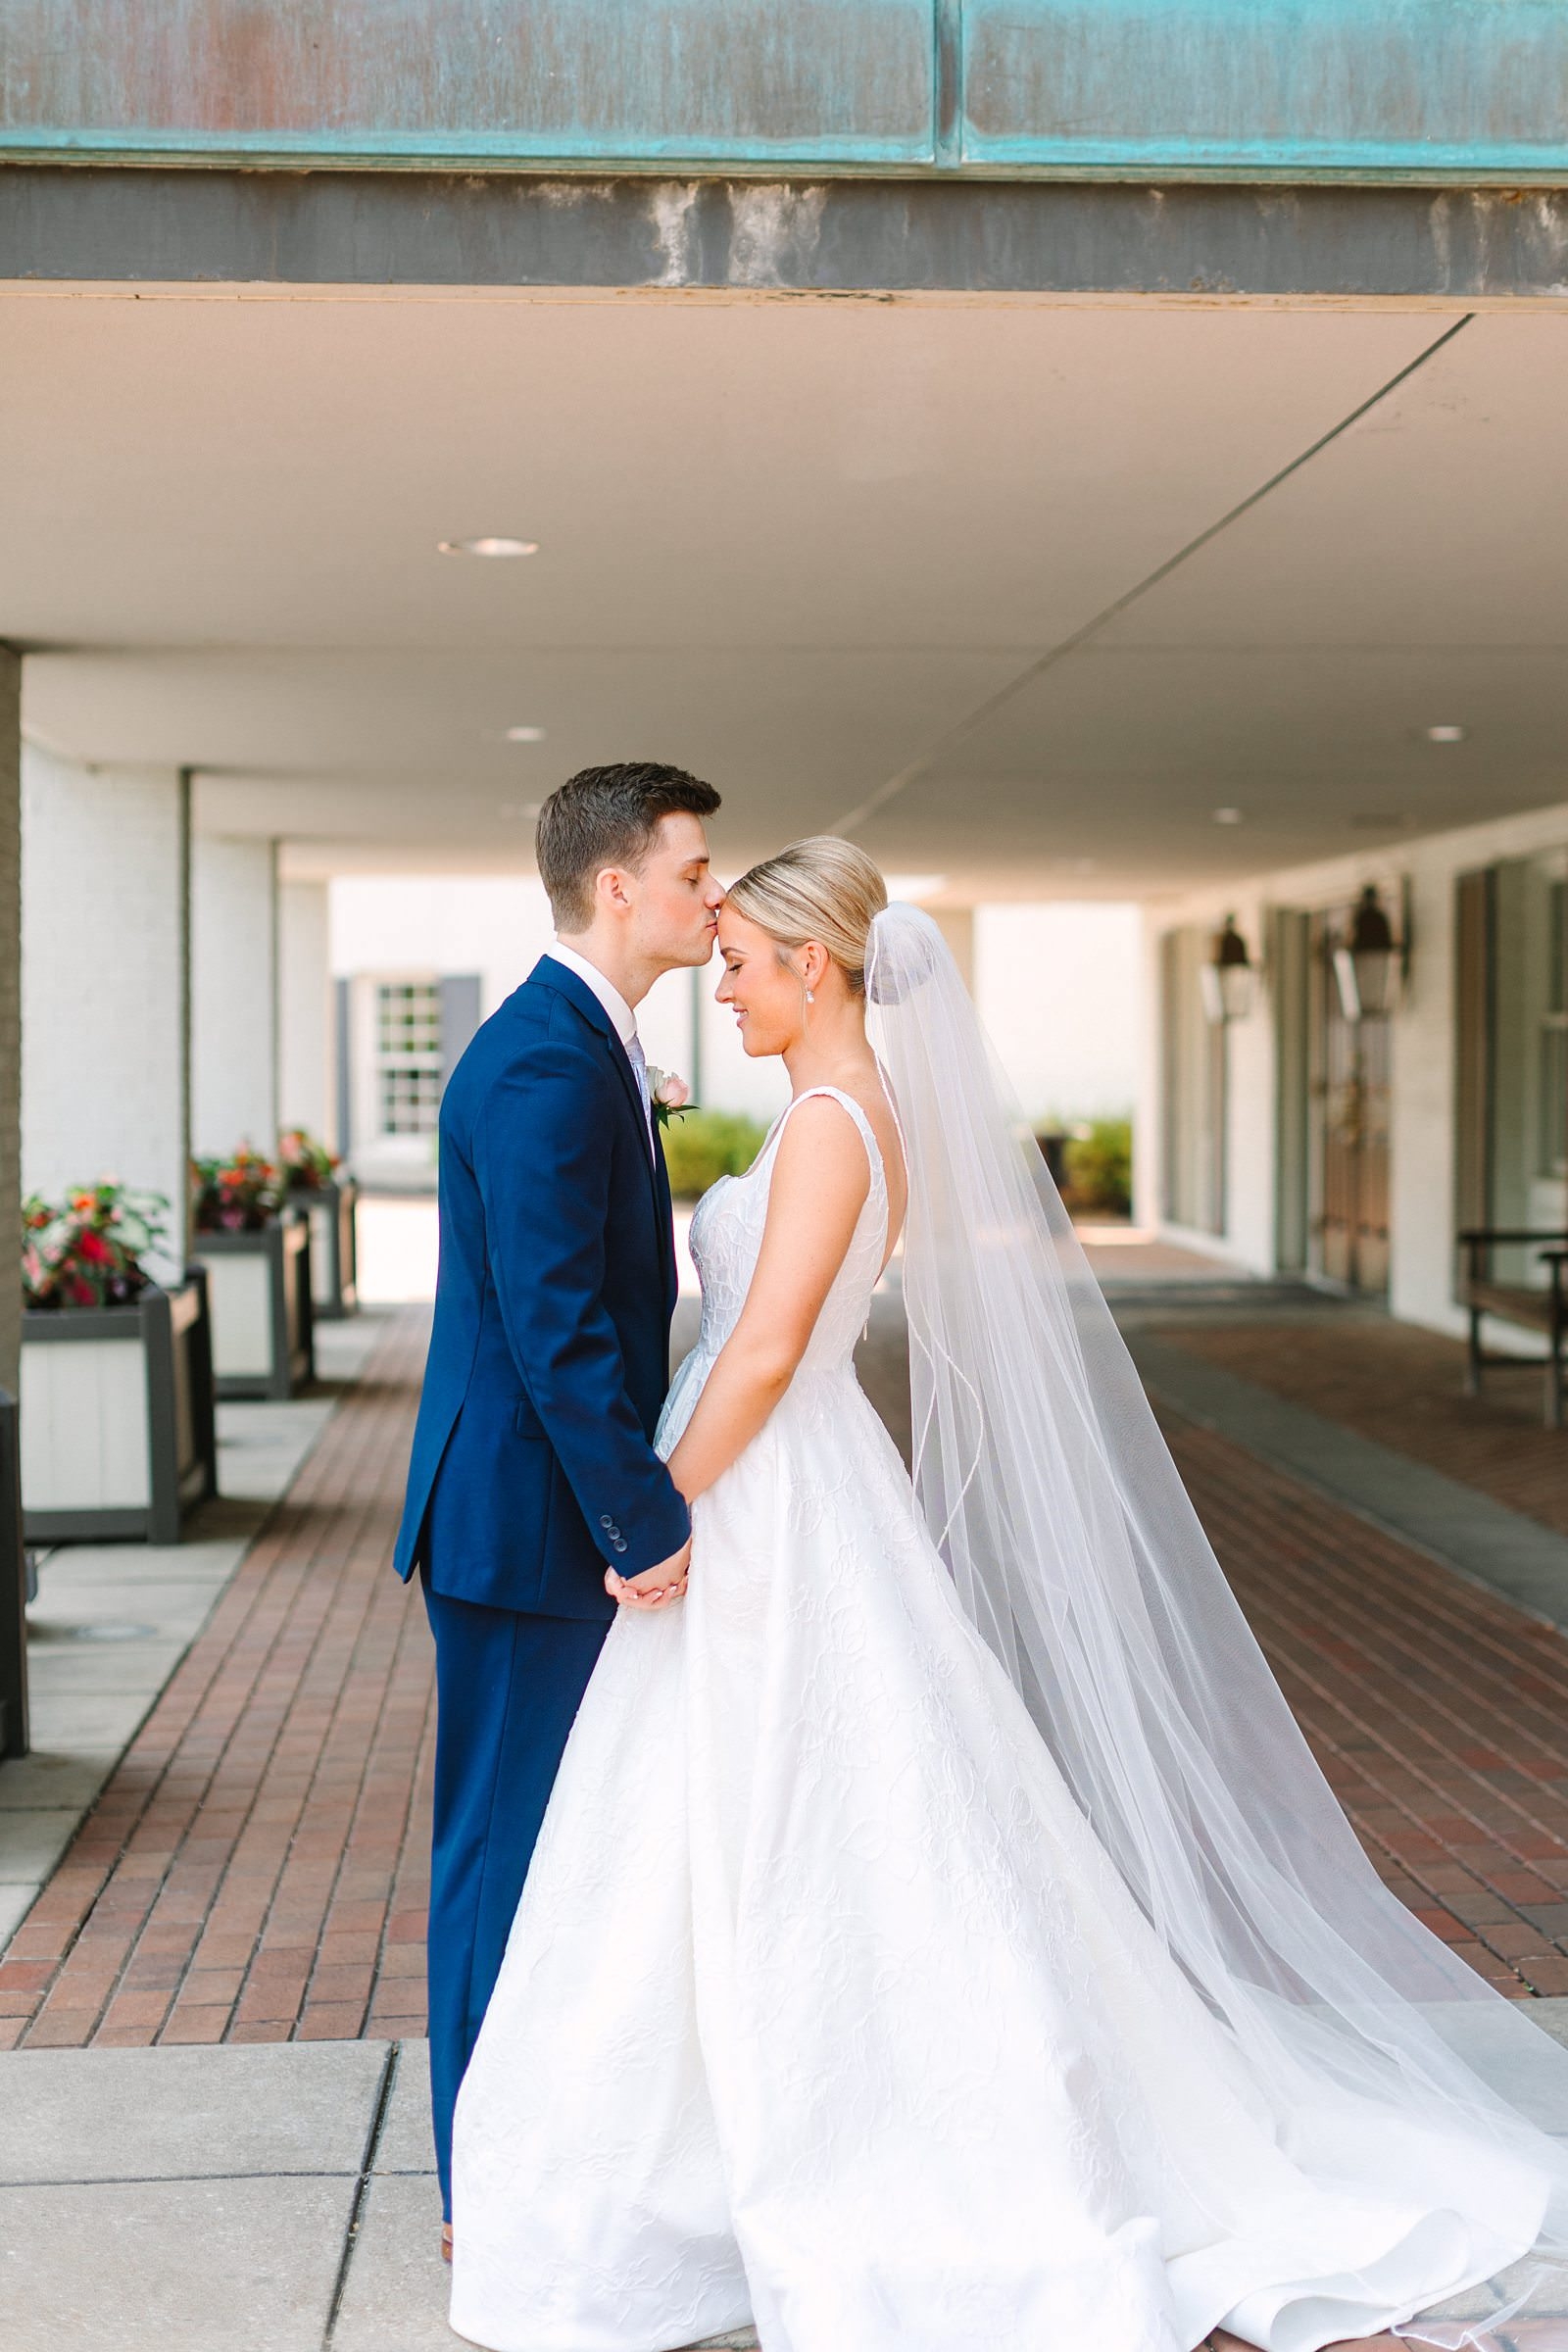 An Evansville Country Club Wedding | Ashley and Beau | Bret and Brandie Photography092.jpg